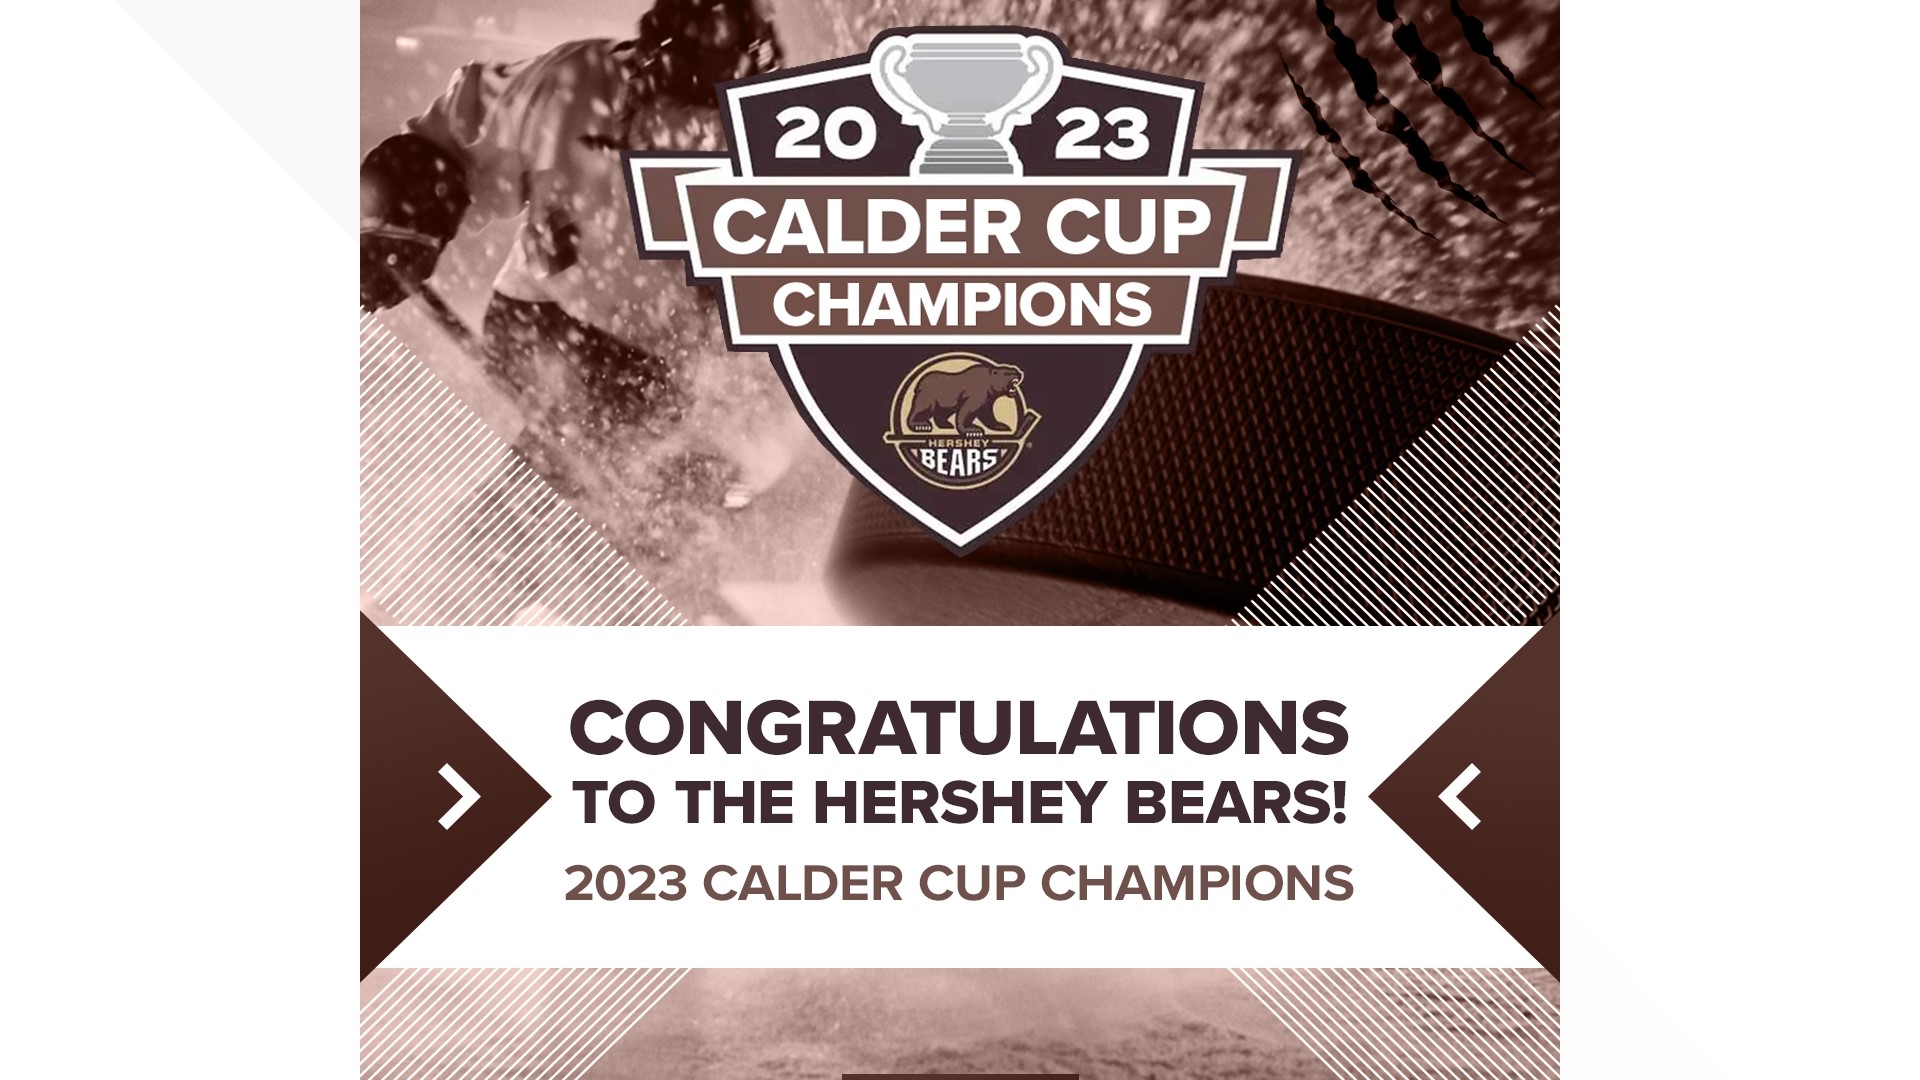 YOUR CHICAGO WOLVES ARE CALDER CUP CHAMPIONS.